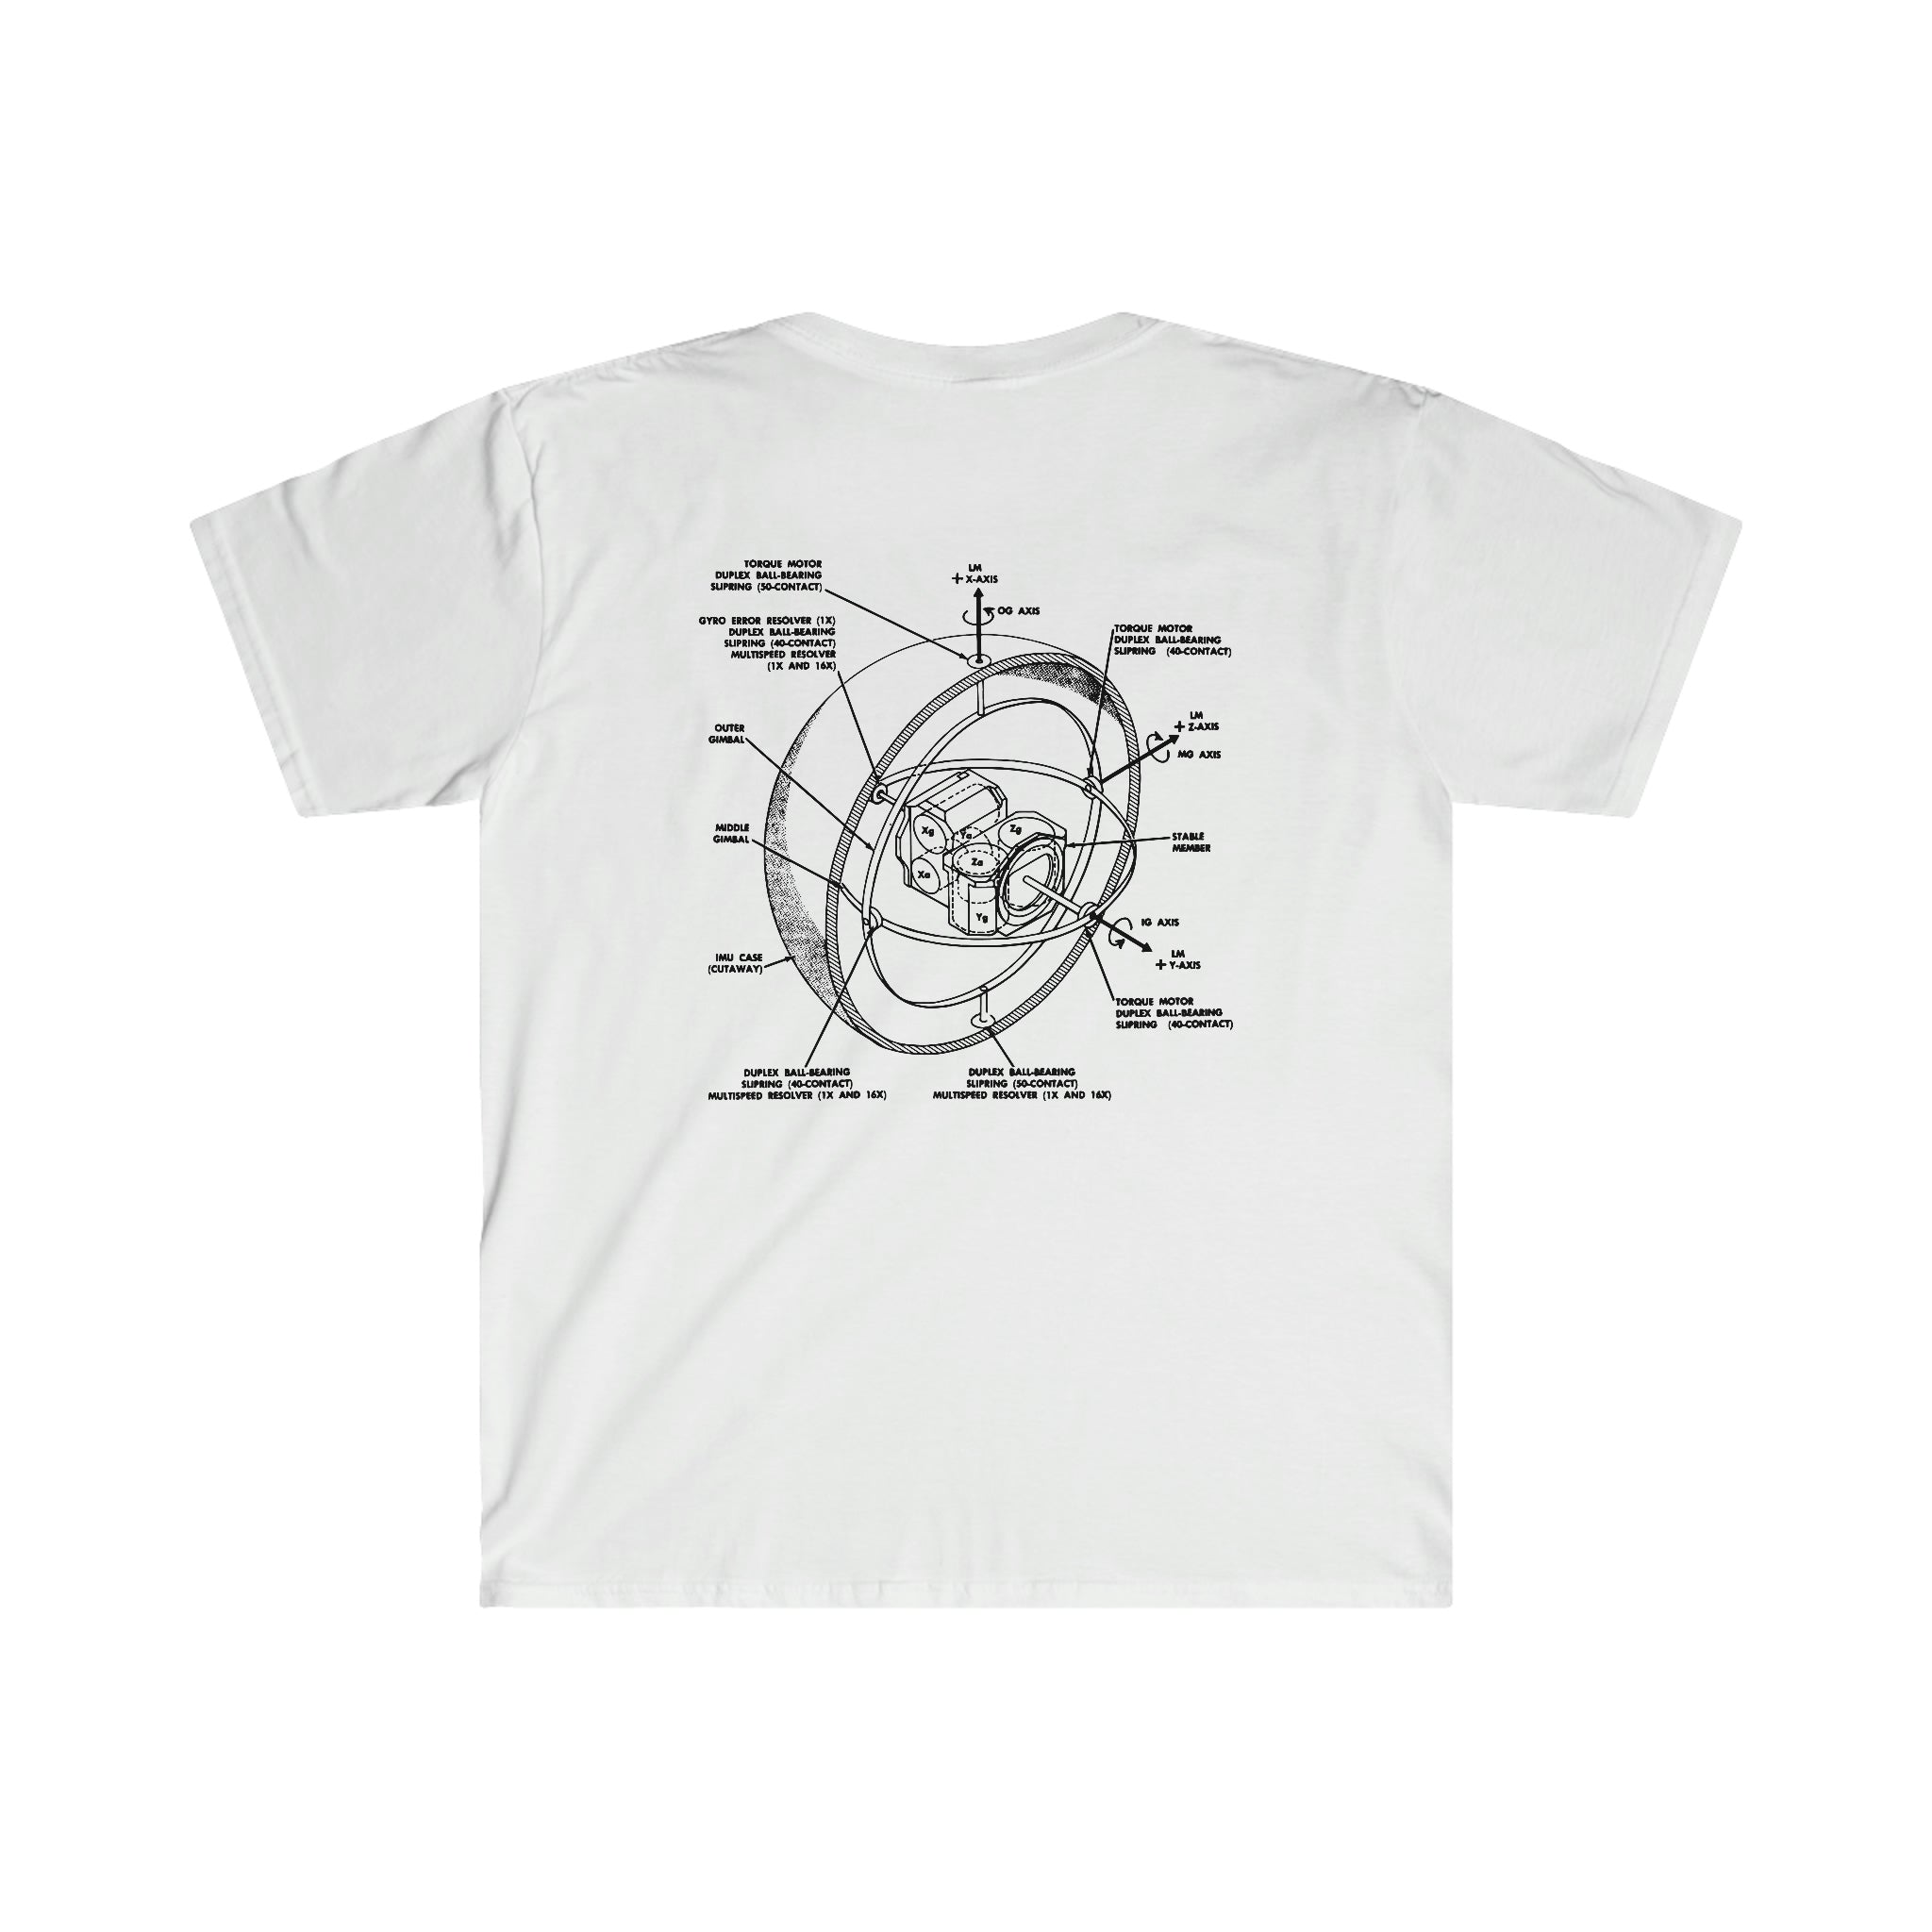 A Space Axis T-Shirt.